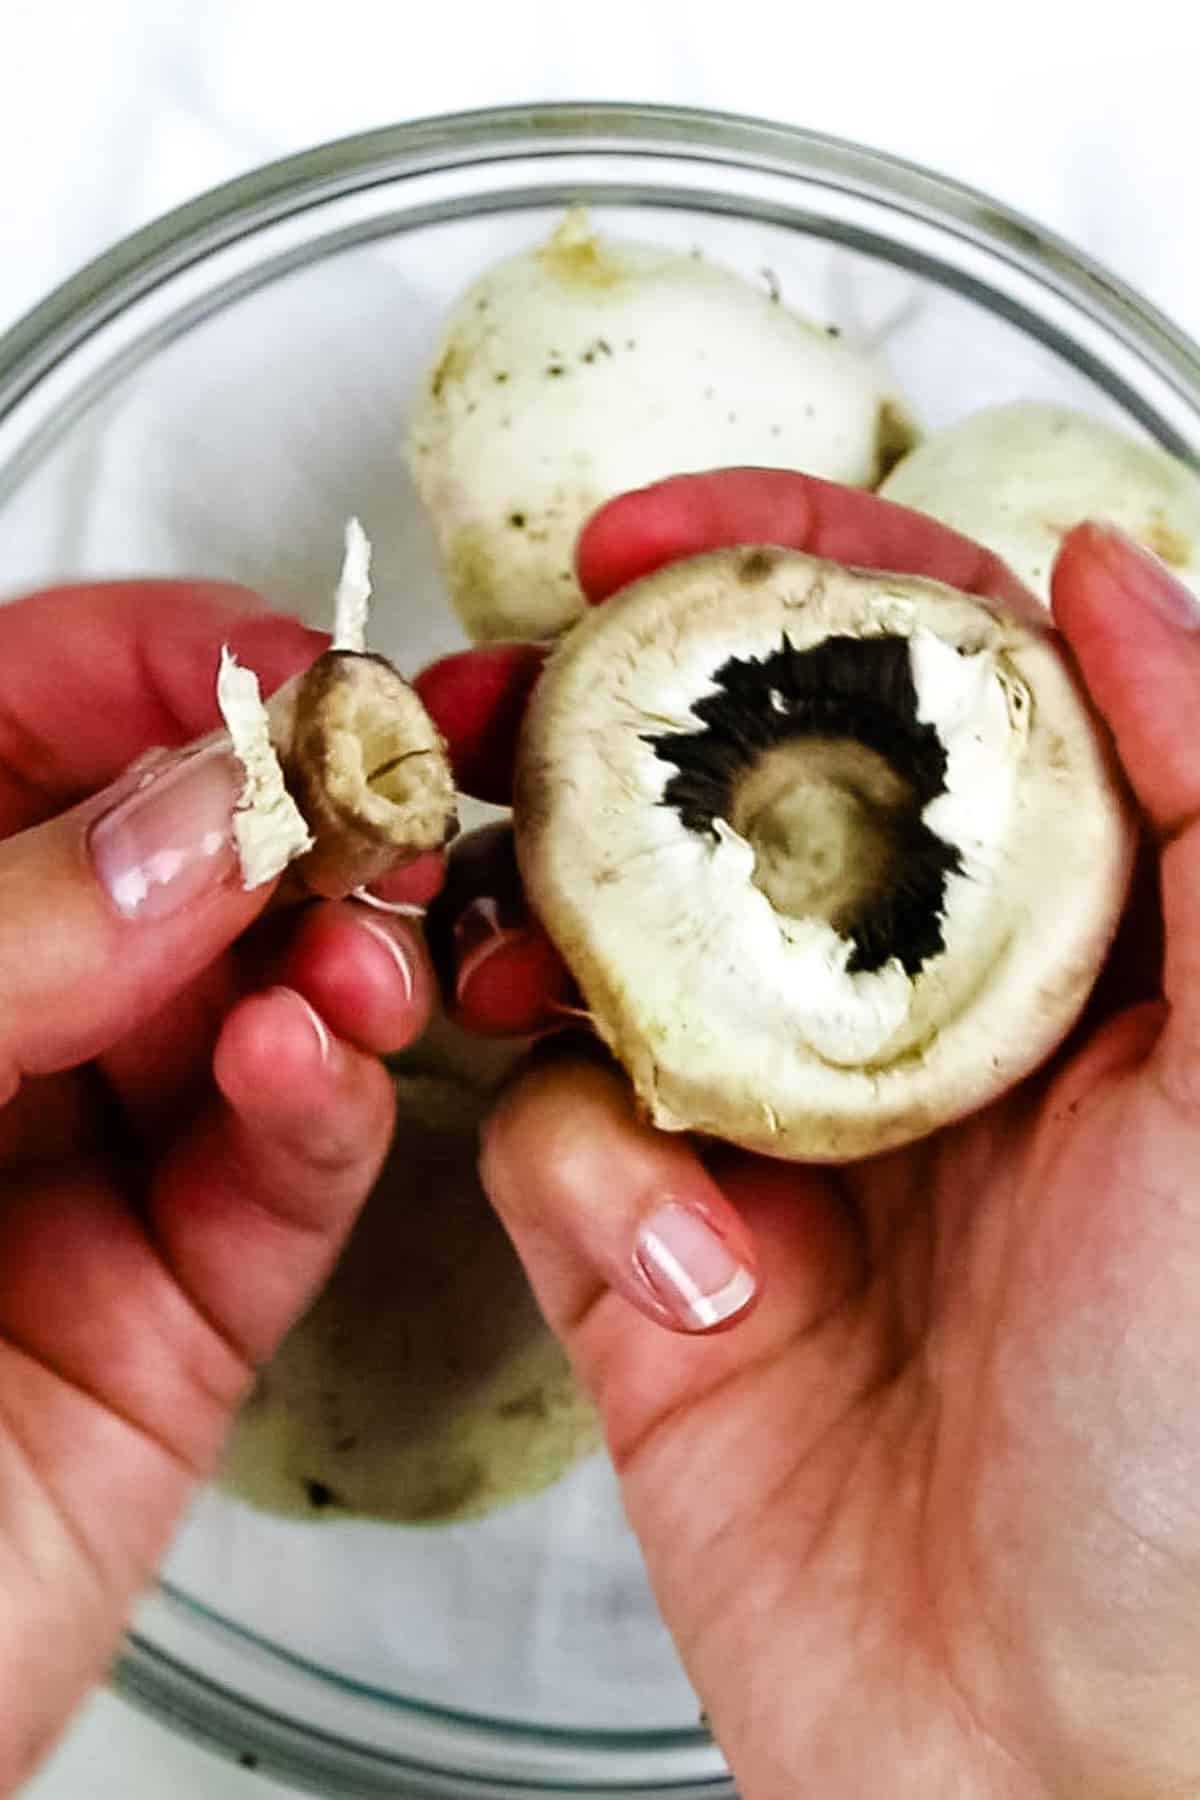 mushroom held in hand with stem picked off by the left hand.